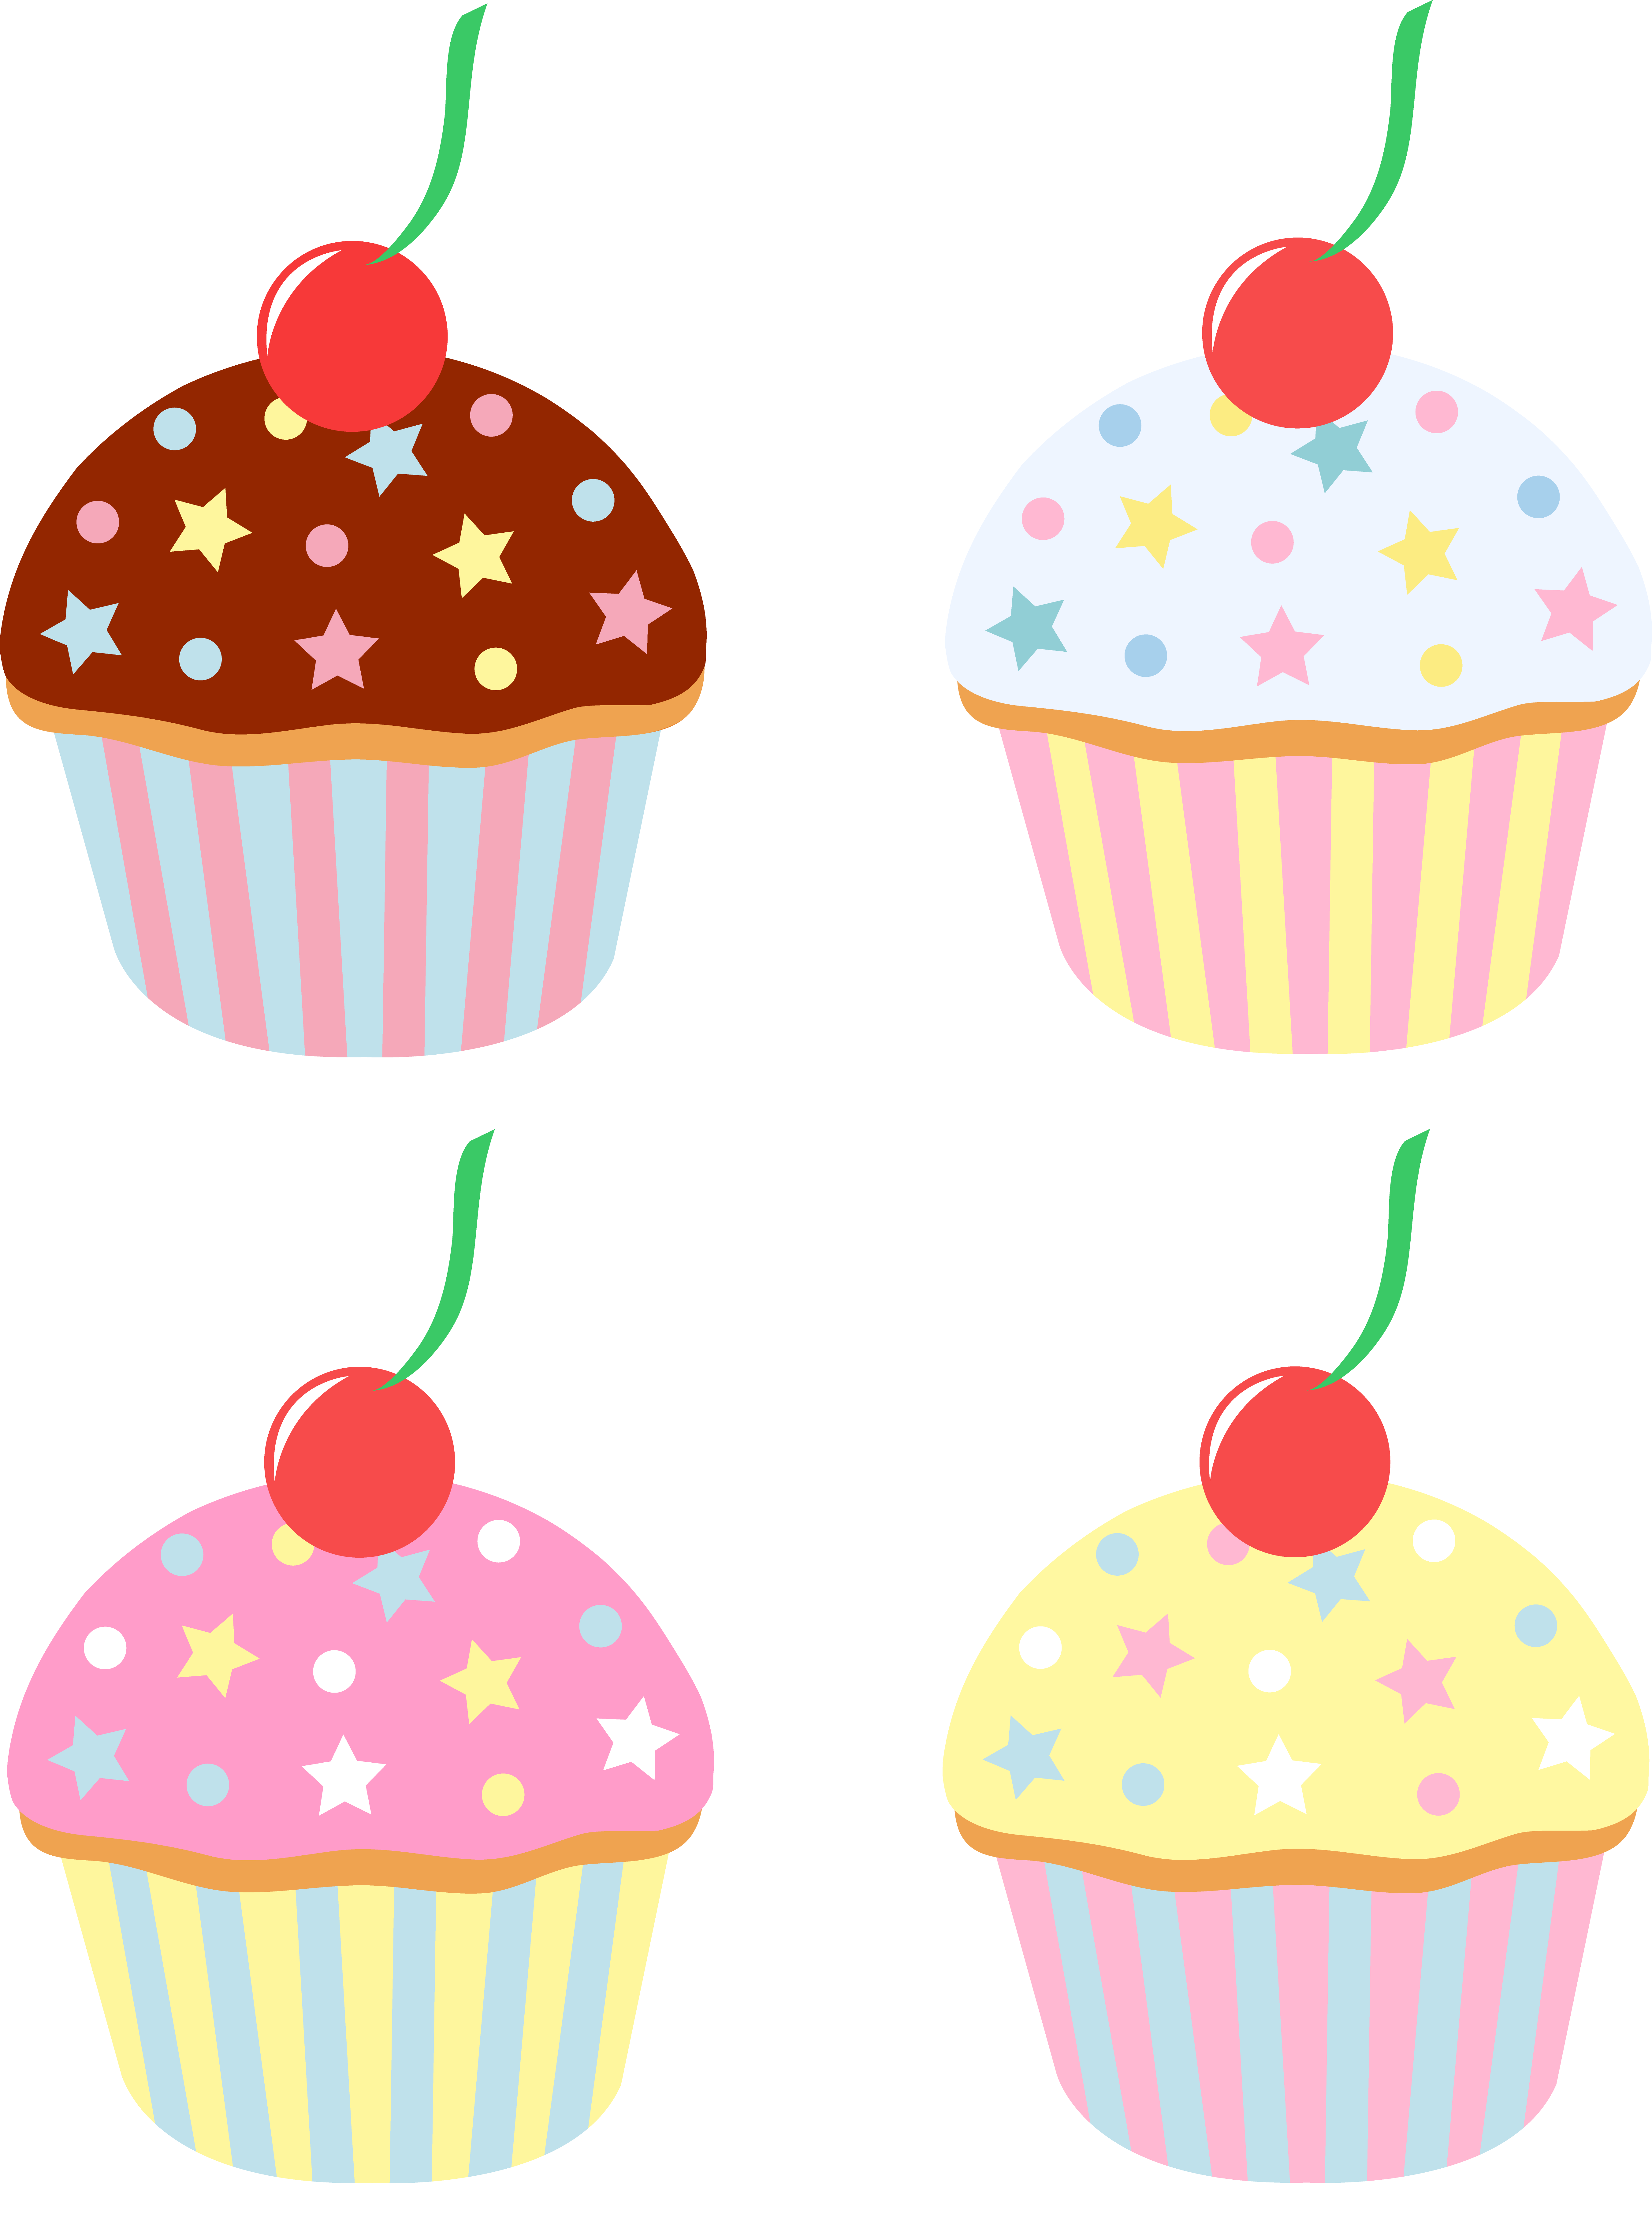 Four Cupcakes With Cherries and Sprinkles - Free Clip Art